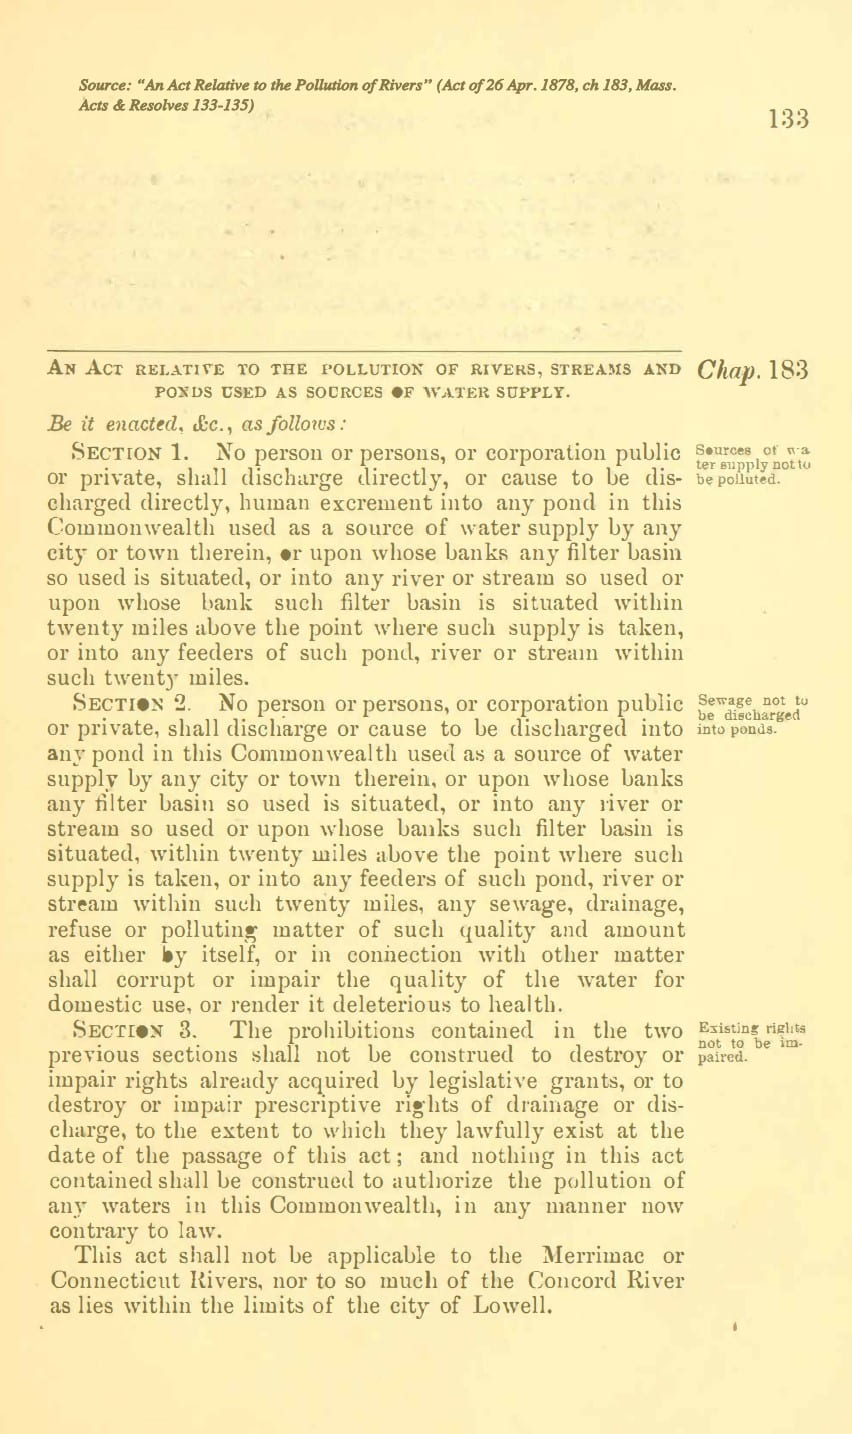 “An Act Relative to the Pollution of Rivers,” Massachusetts State Law, 1878.